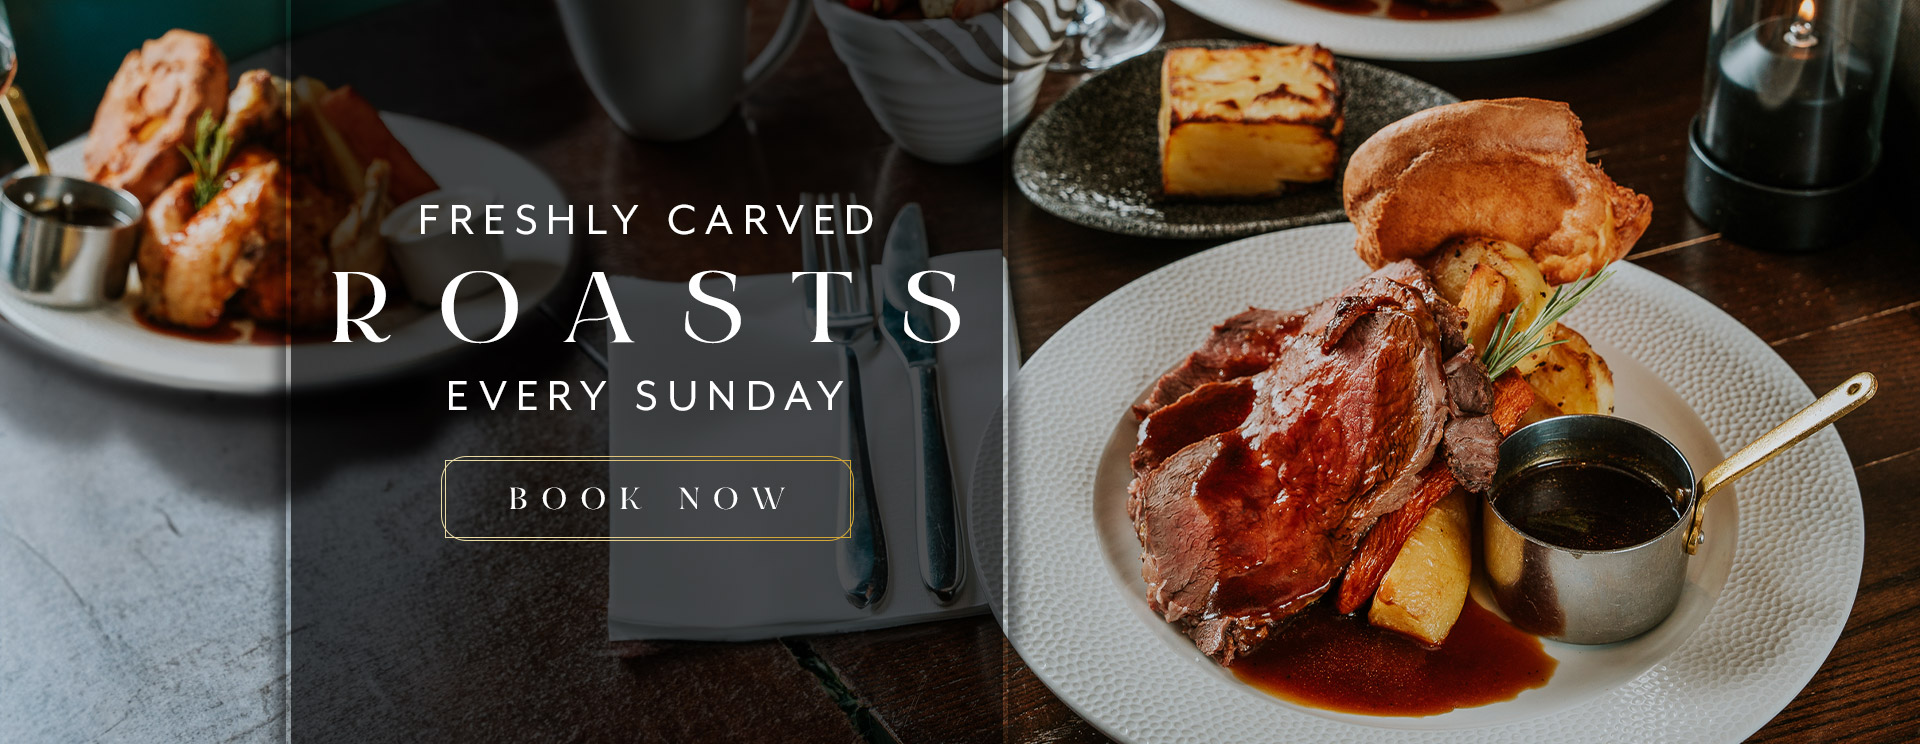 Sunday Lunch at The Salisbury Arms